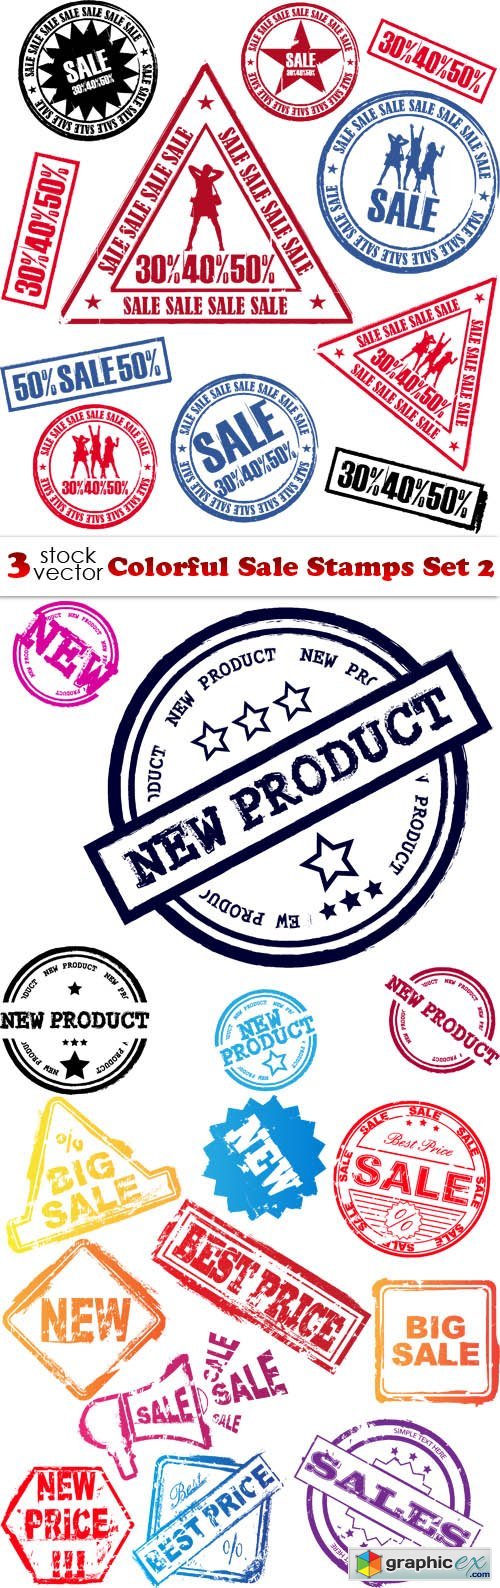 Colorful Sale Stamps Set 2